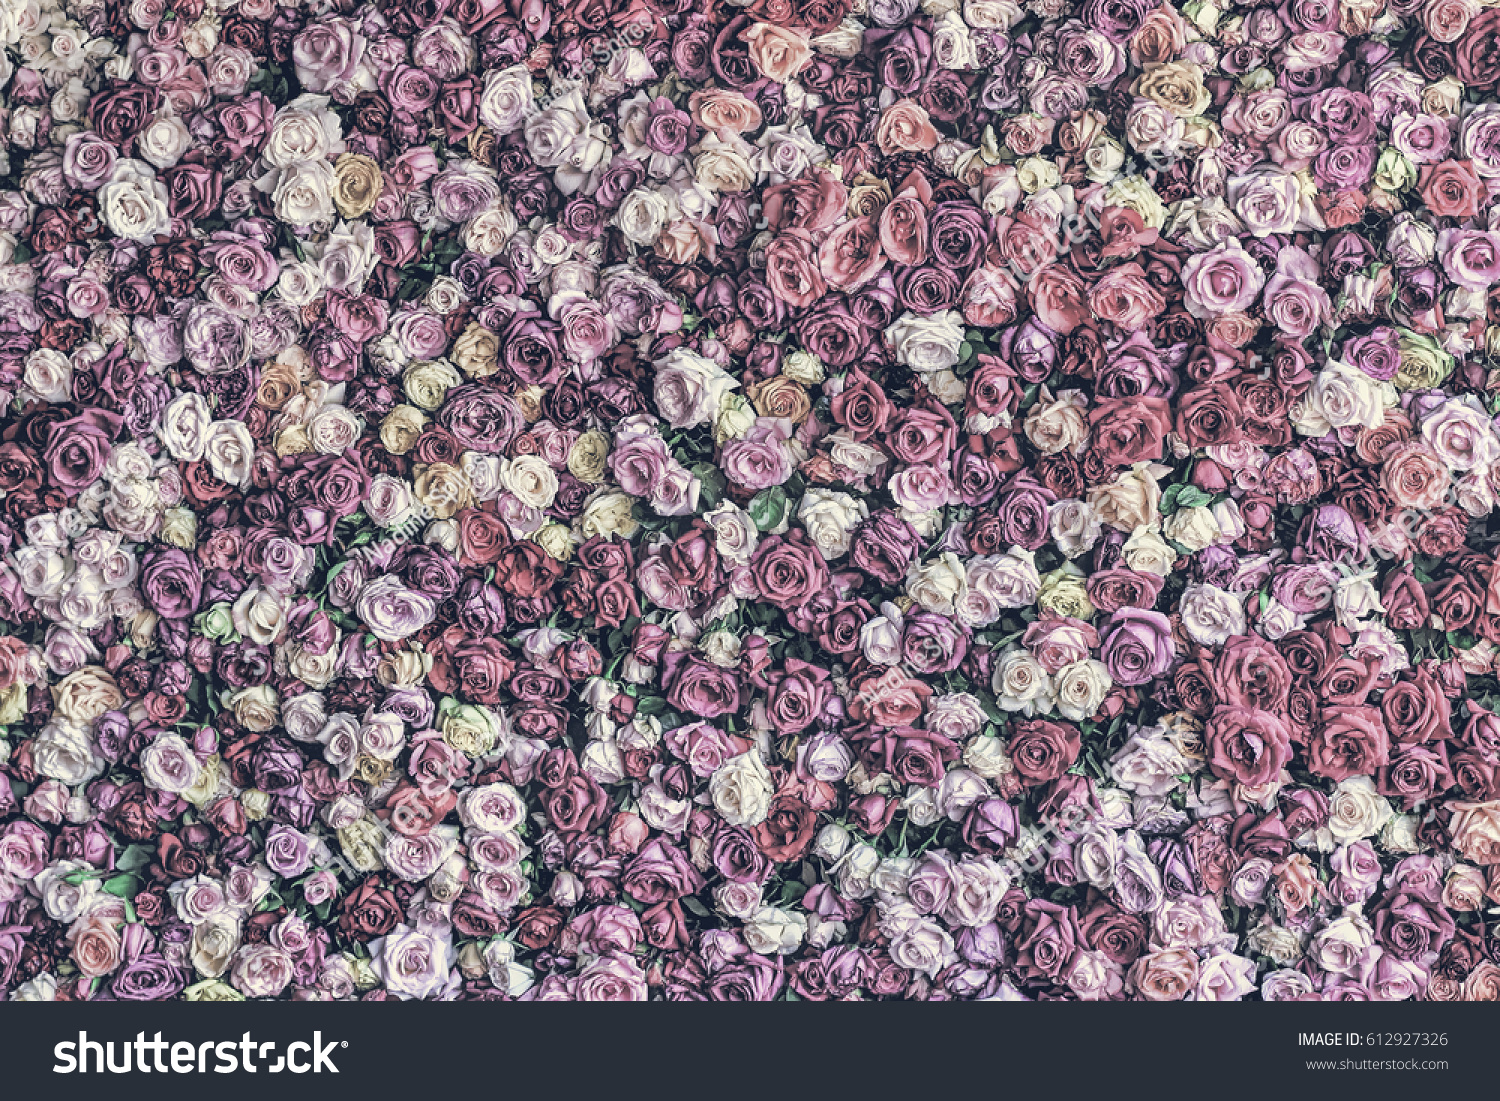 Desaturated Rose Wall Background Less Vibrant Stock Photo